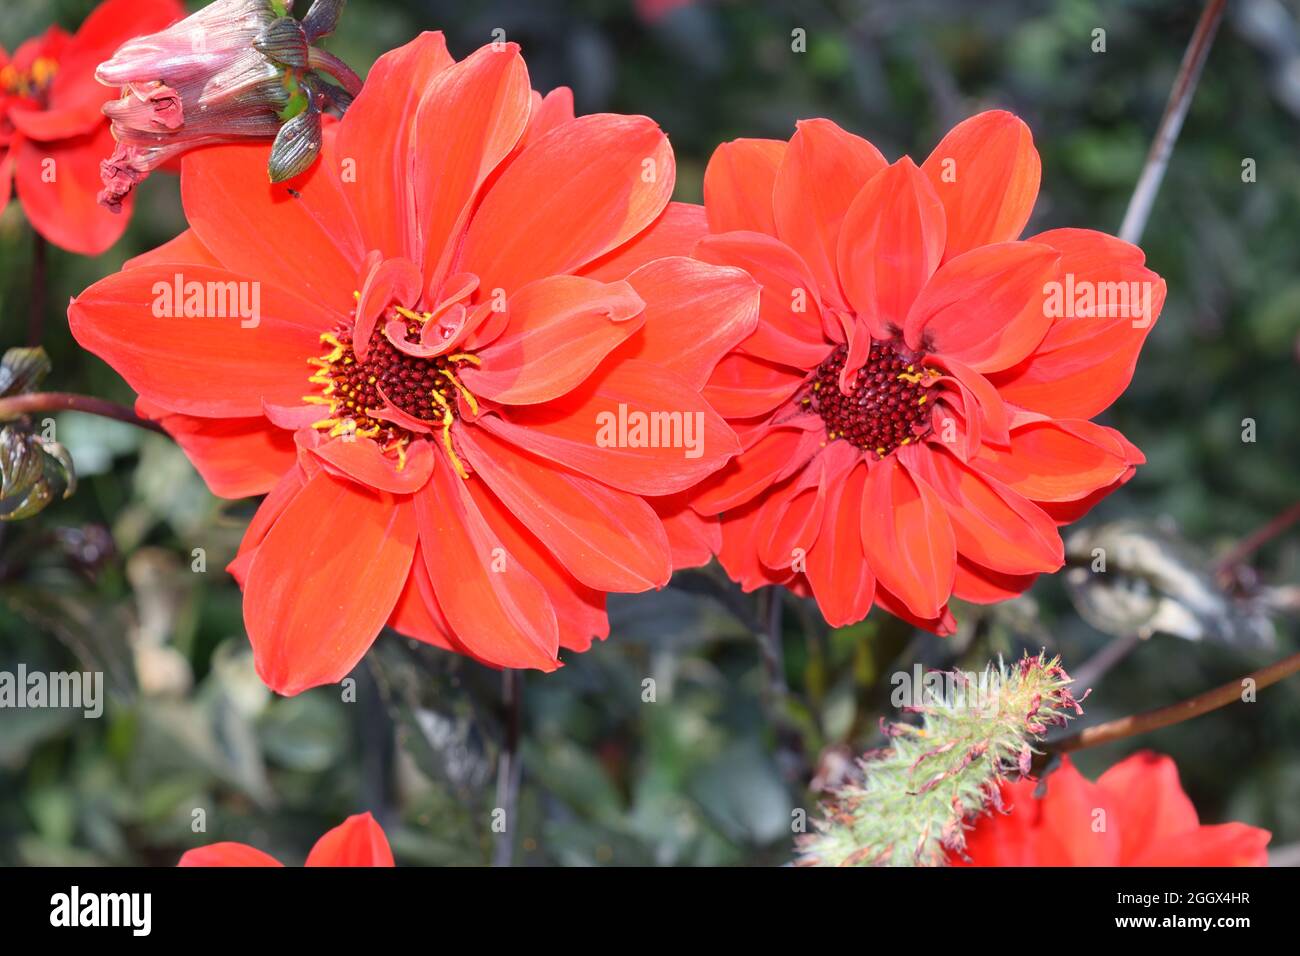 Dahlia type Bishop of Llandaff. Two single red flowers with dark centres. Stock Photo